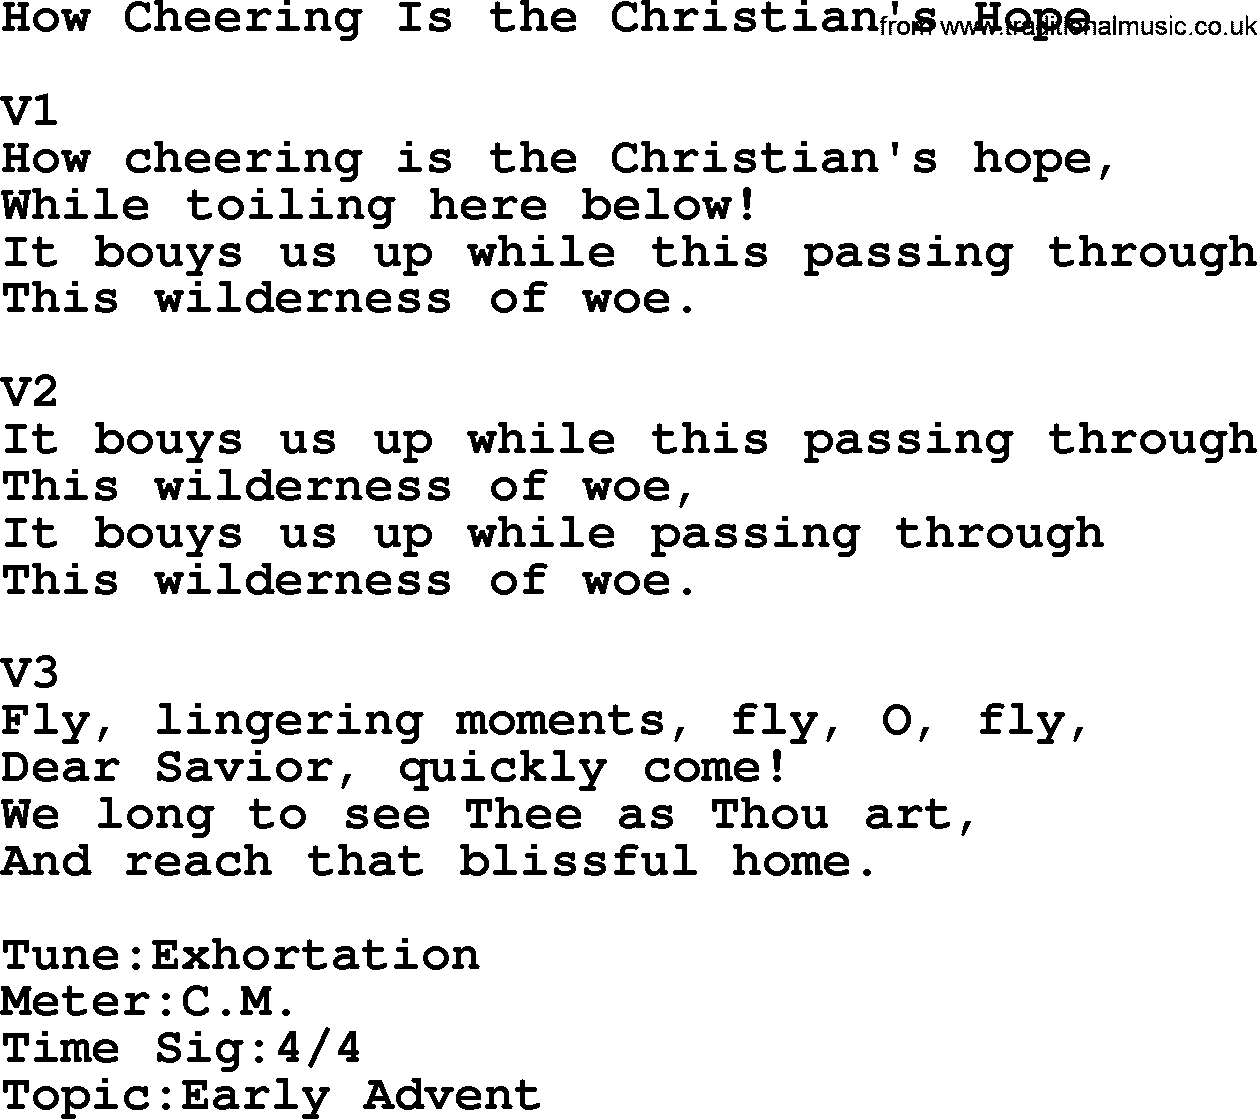 Adventist Hynms collection, Hymn: How Cheering Is The Christian's Hope, lyrics with PDF